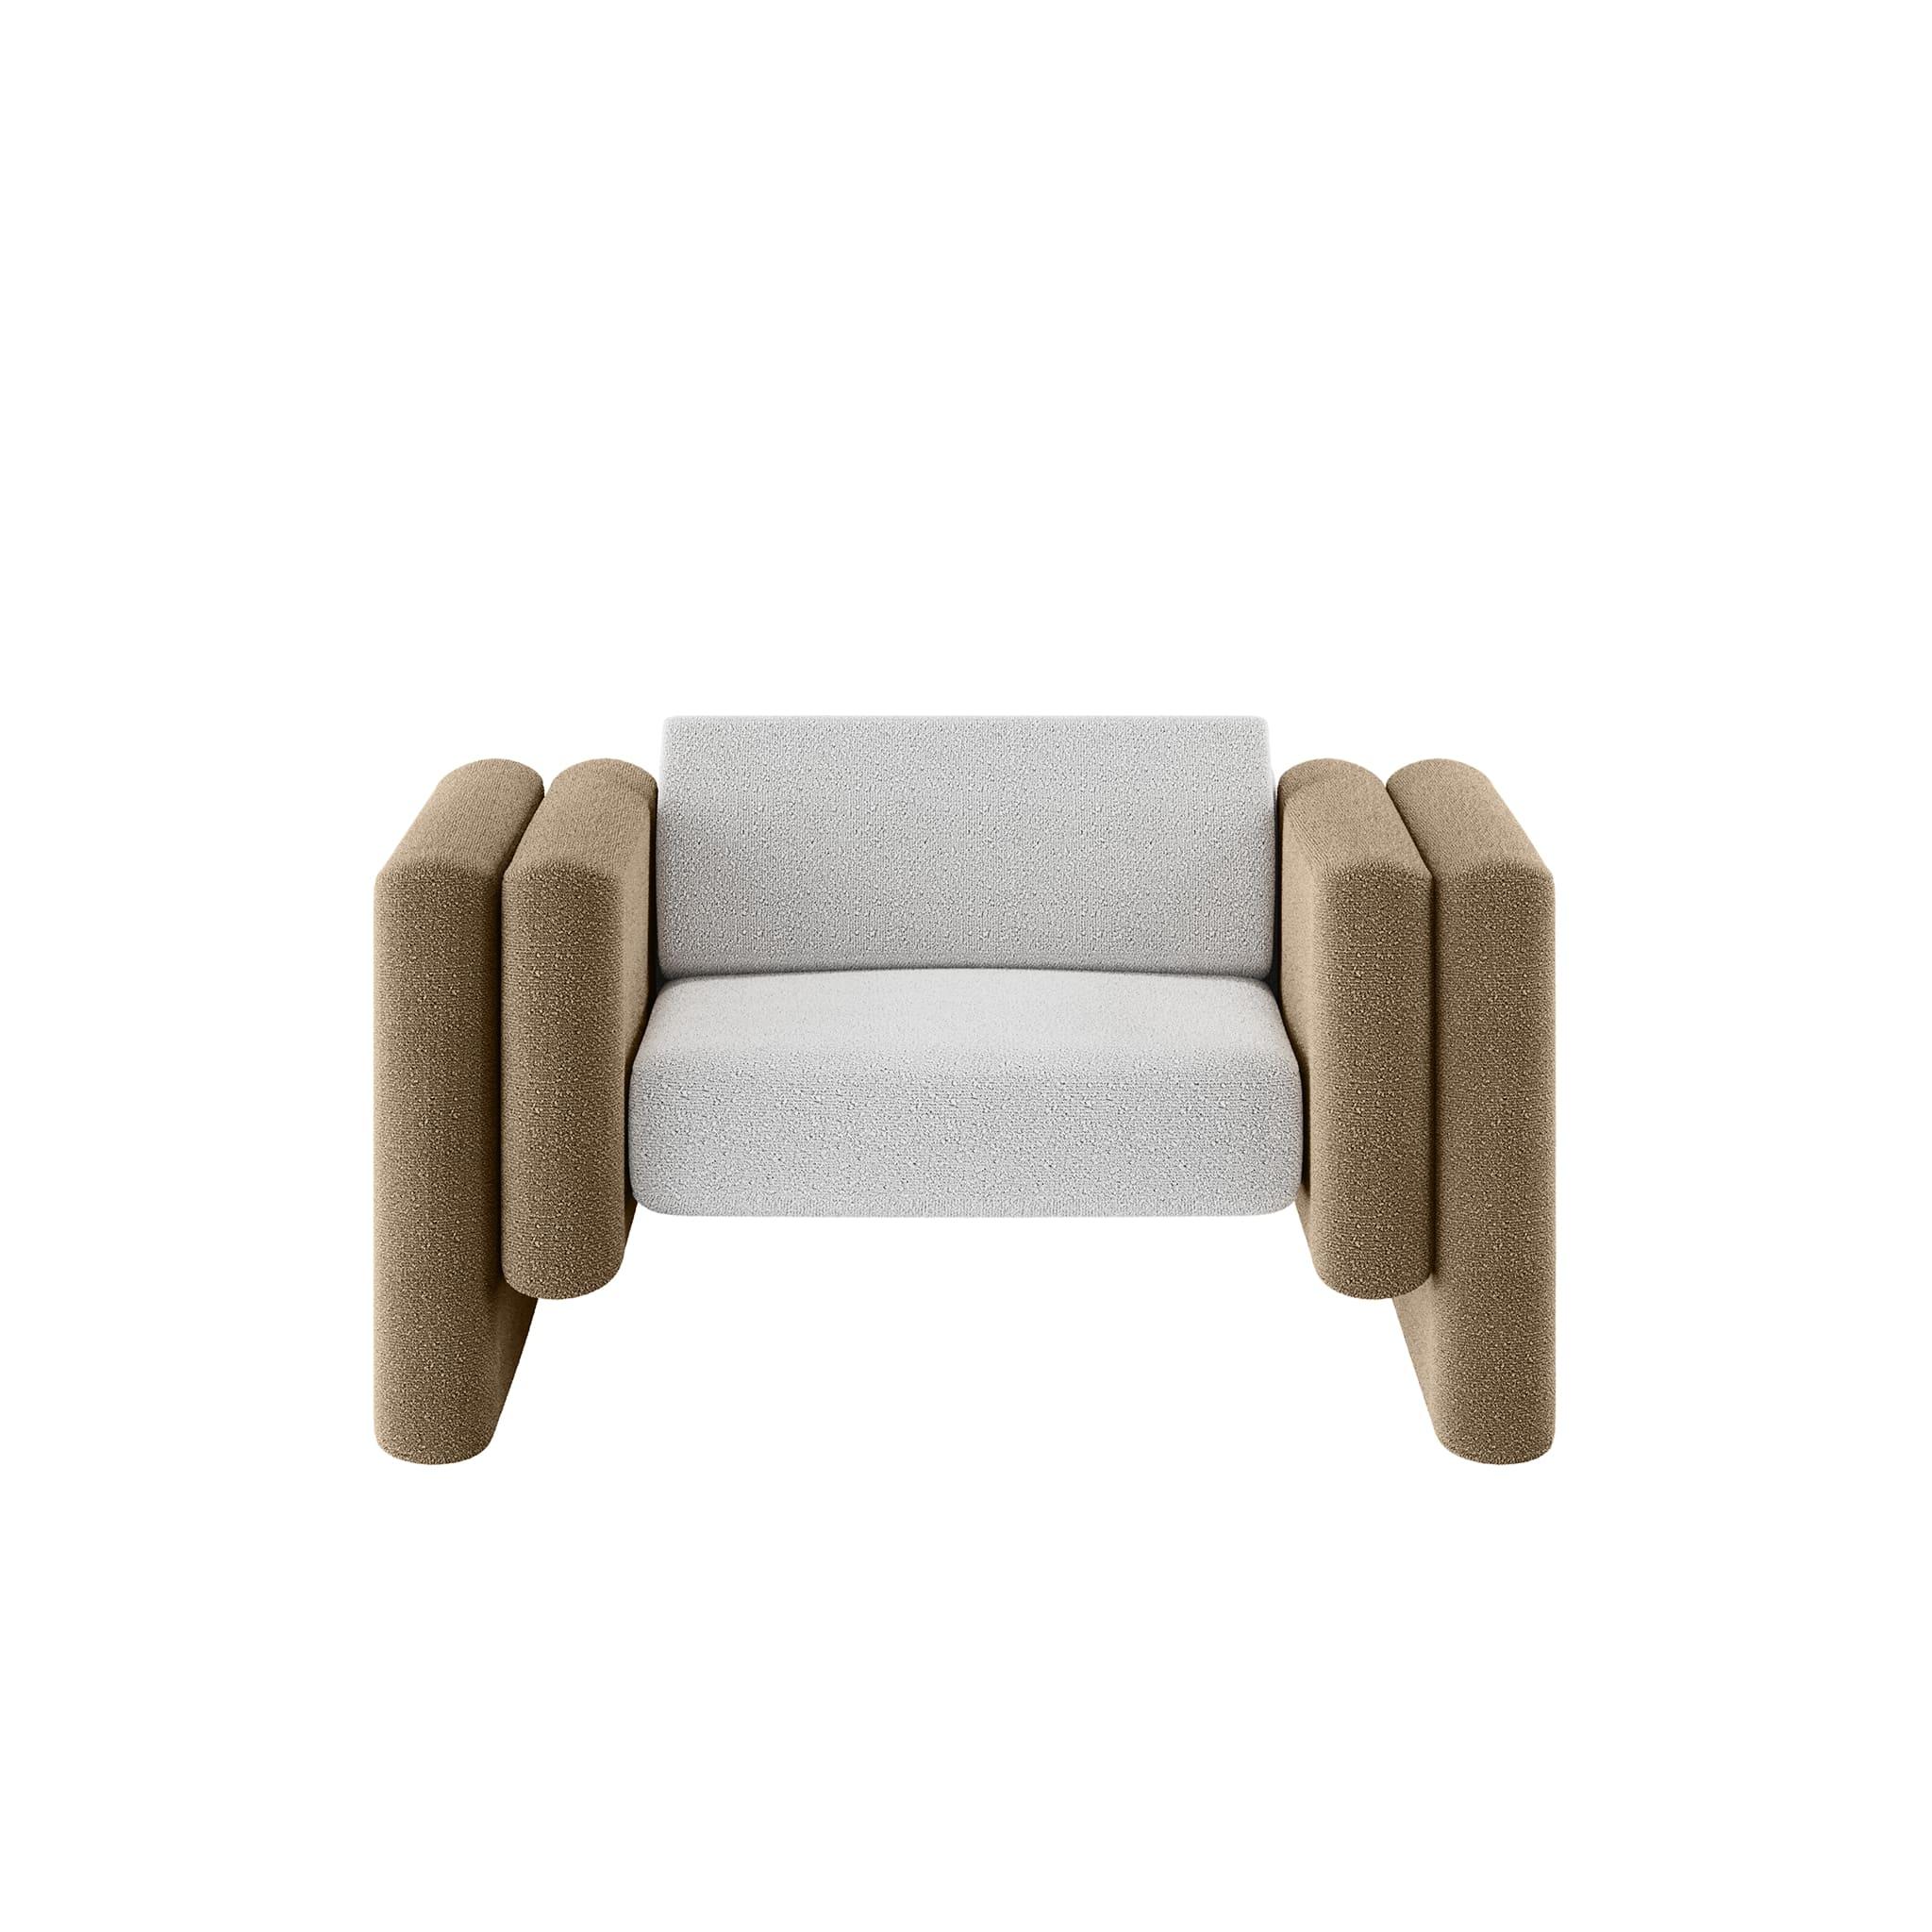 Lisola Armchair Khaki & White is a modern outdoor seating piece. A unique outdoor chair created by the most refined design with delicate details makes it an authentic modern design piece for an outdoor area. The Lisola Armchair Khaki & White has the